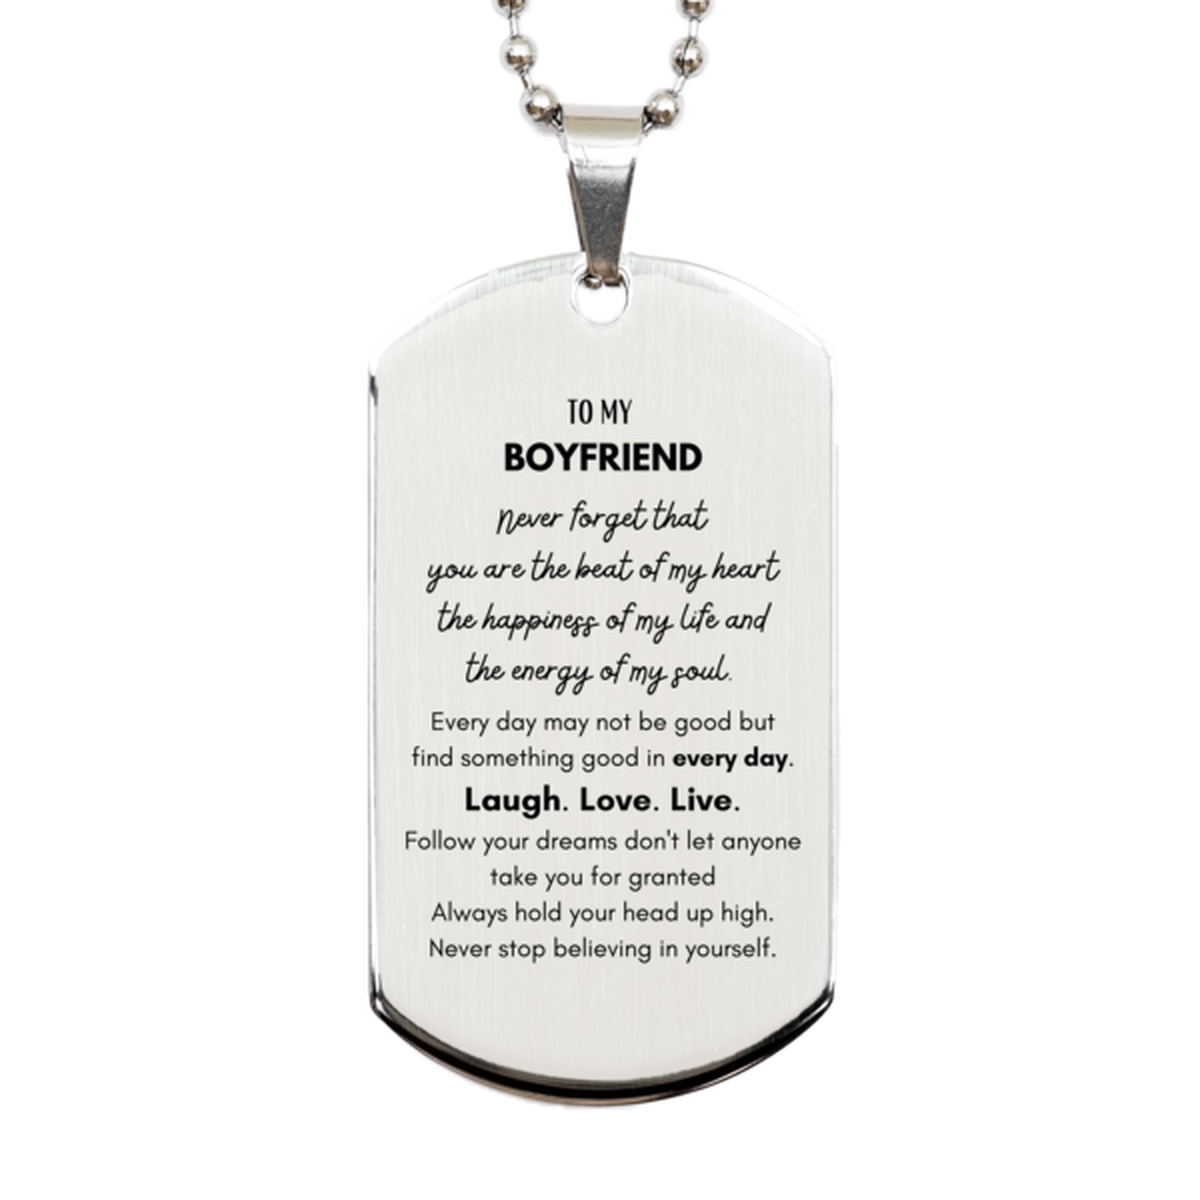 To My Boyfriend Dogtag Gifts, Christmas Boyfriend Silver Dog Tag Present, Birthday Unique Motivational For Boyfriend, To My Boyfriend Never forget that you are the beat of my heart the happiness of my life and the energy of my soul